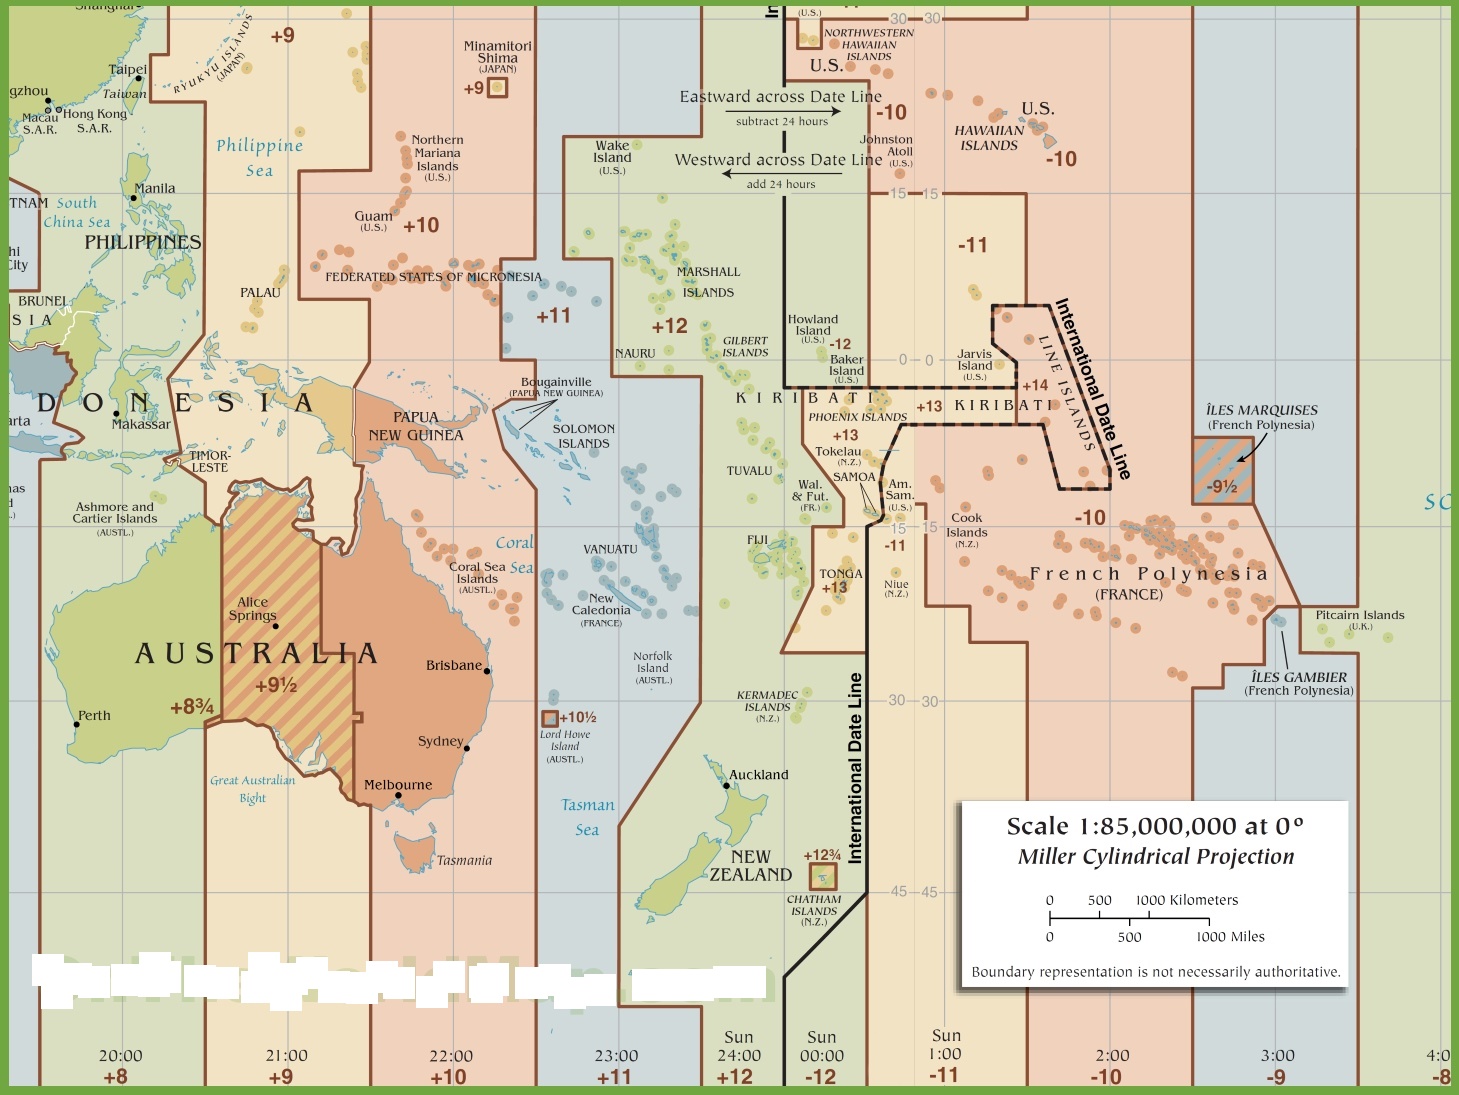 Time Zone Map of Oceania | Oceania Time Zone Map